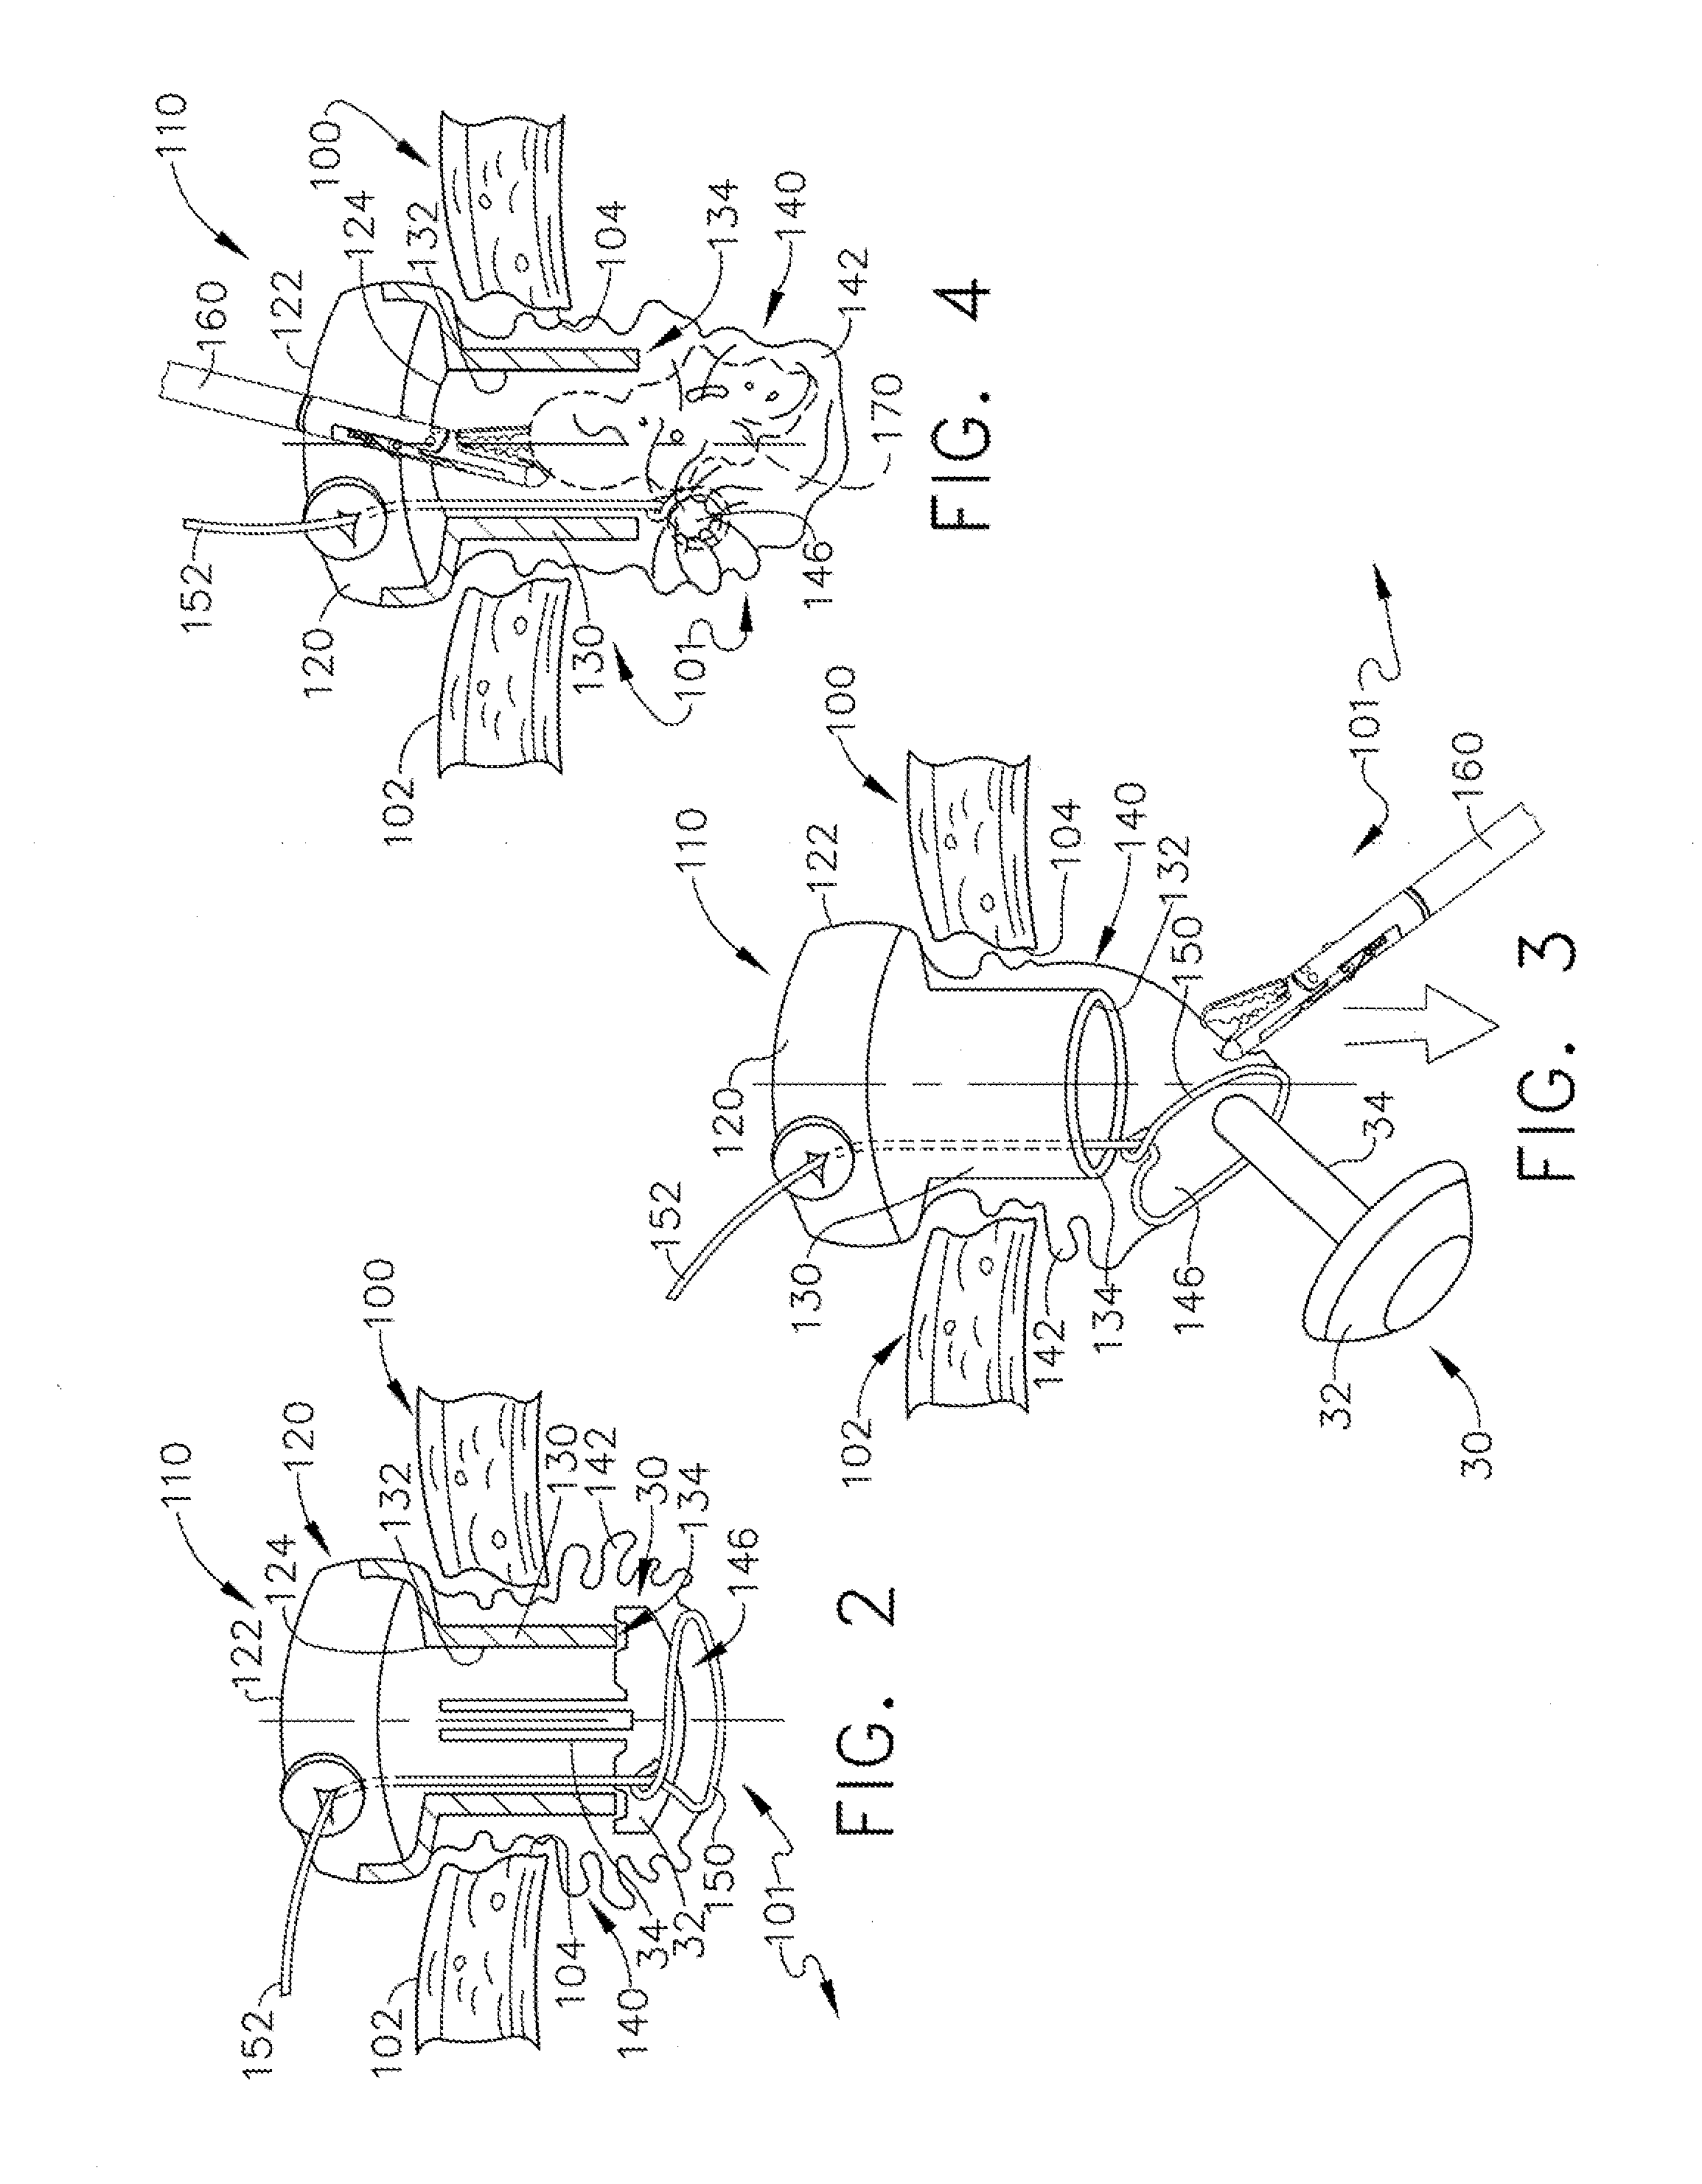 Surgical access devices with anvil introduction and specimen retrieval structures